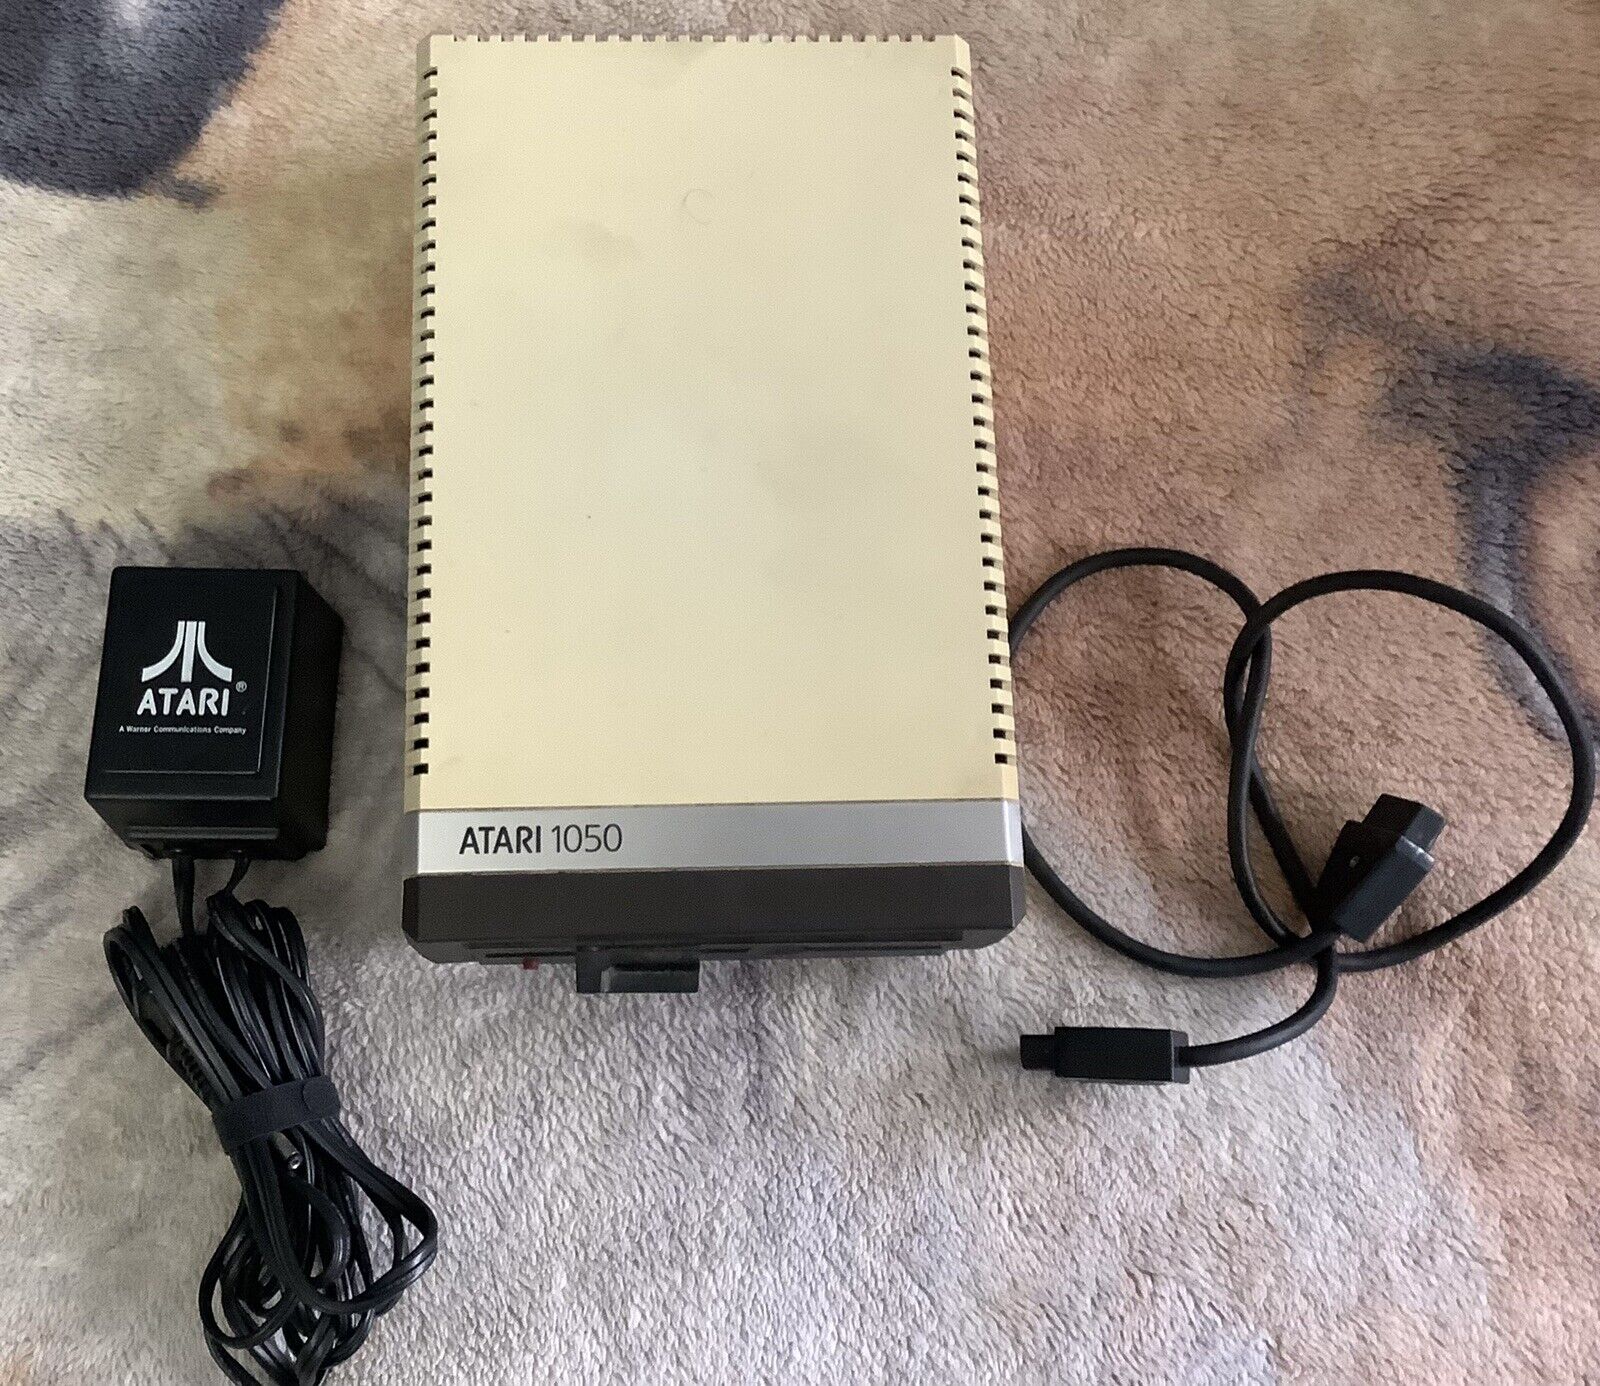 Atari 1050 Floppy Disk Drive With PSU And SIO Cable, Tested, Working